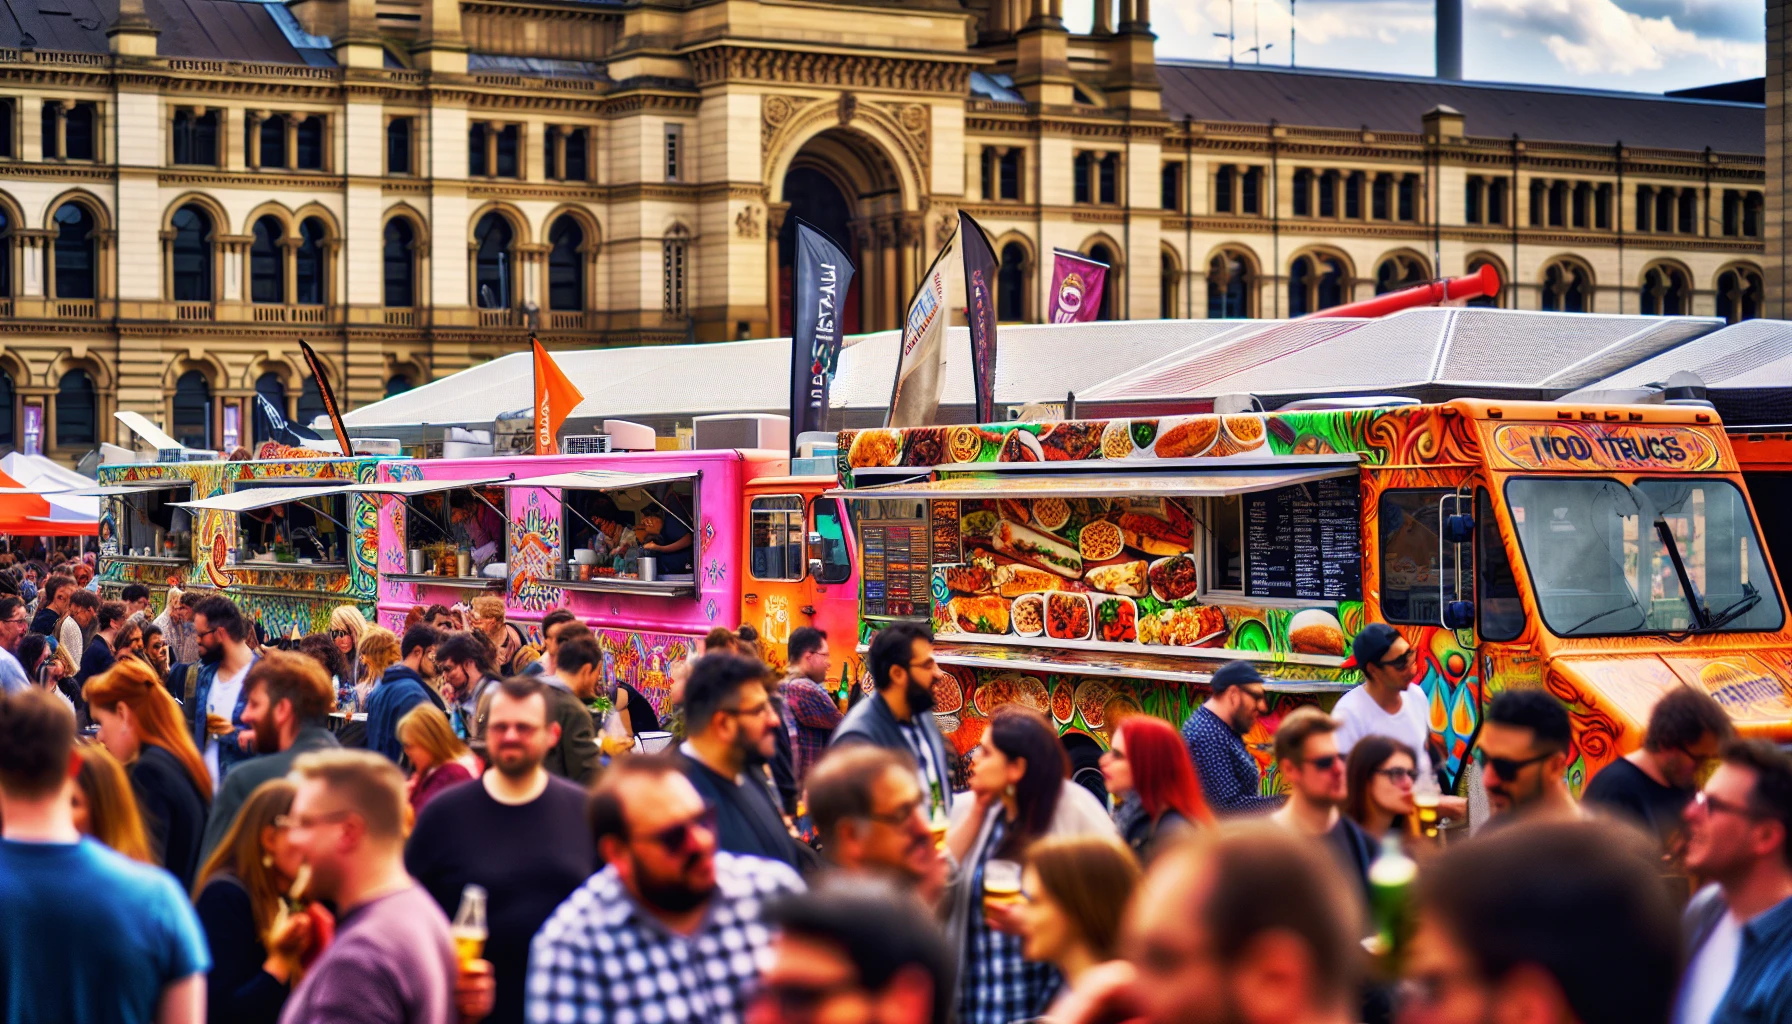 A lively street food festival with food trucks and enthusiastic attendees